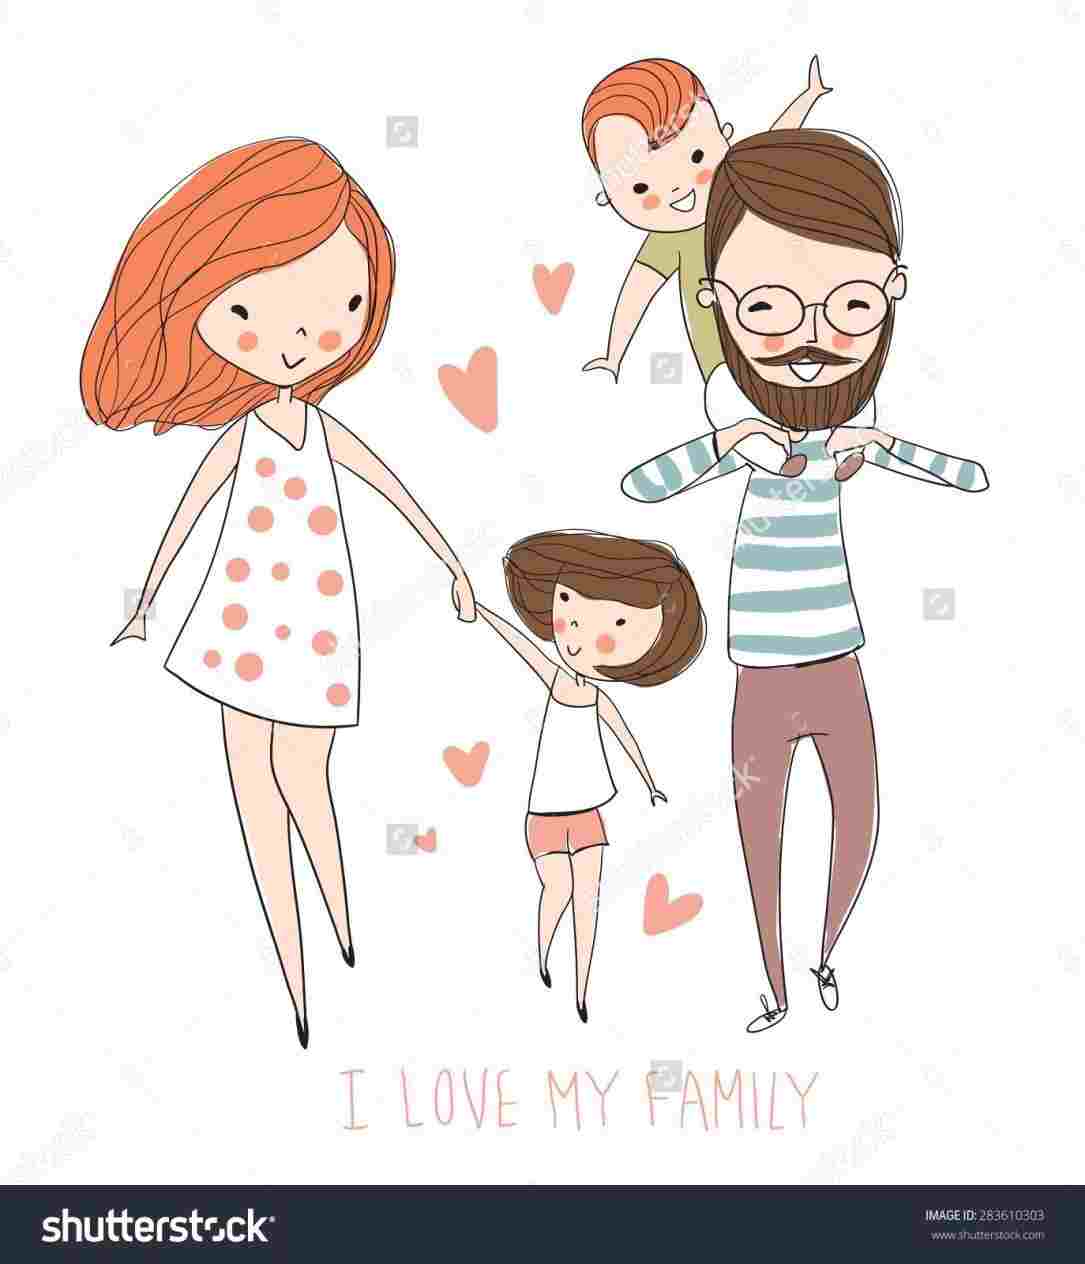 Newest For Cartoon Family Cartoon Simple Drawing Images | Tasya Baby